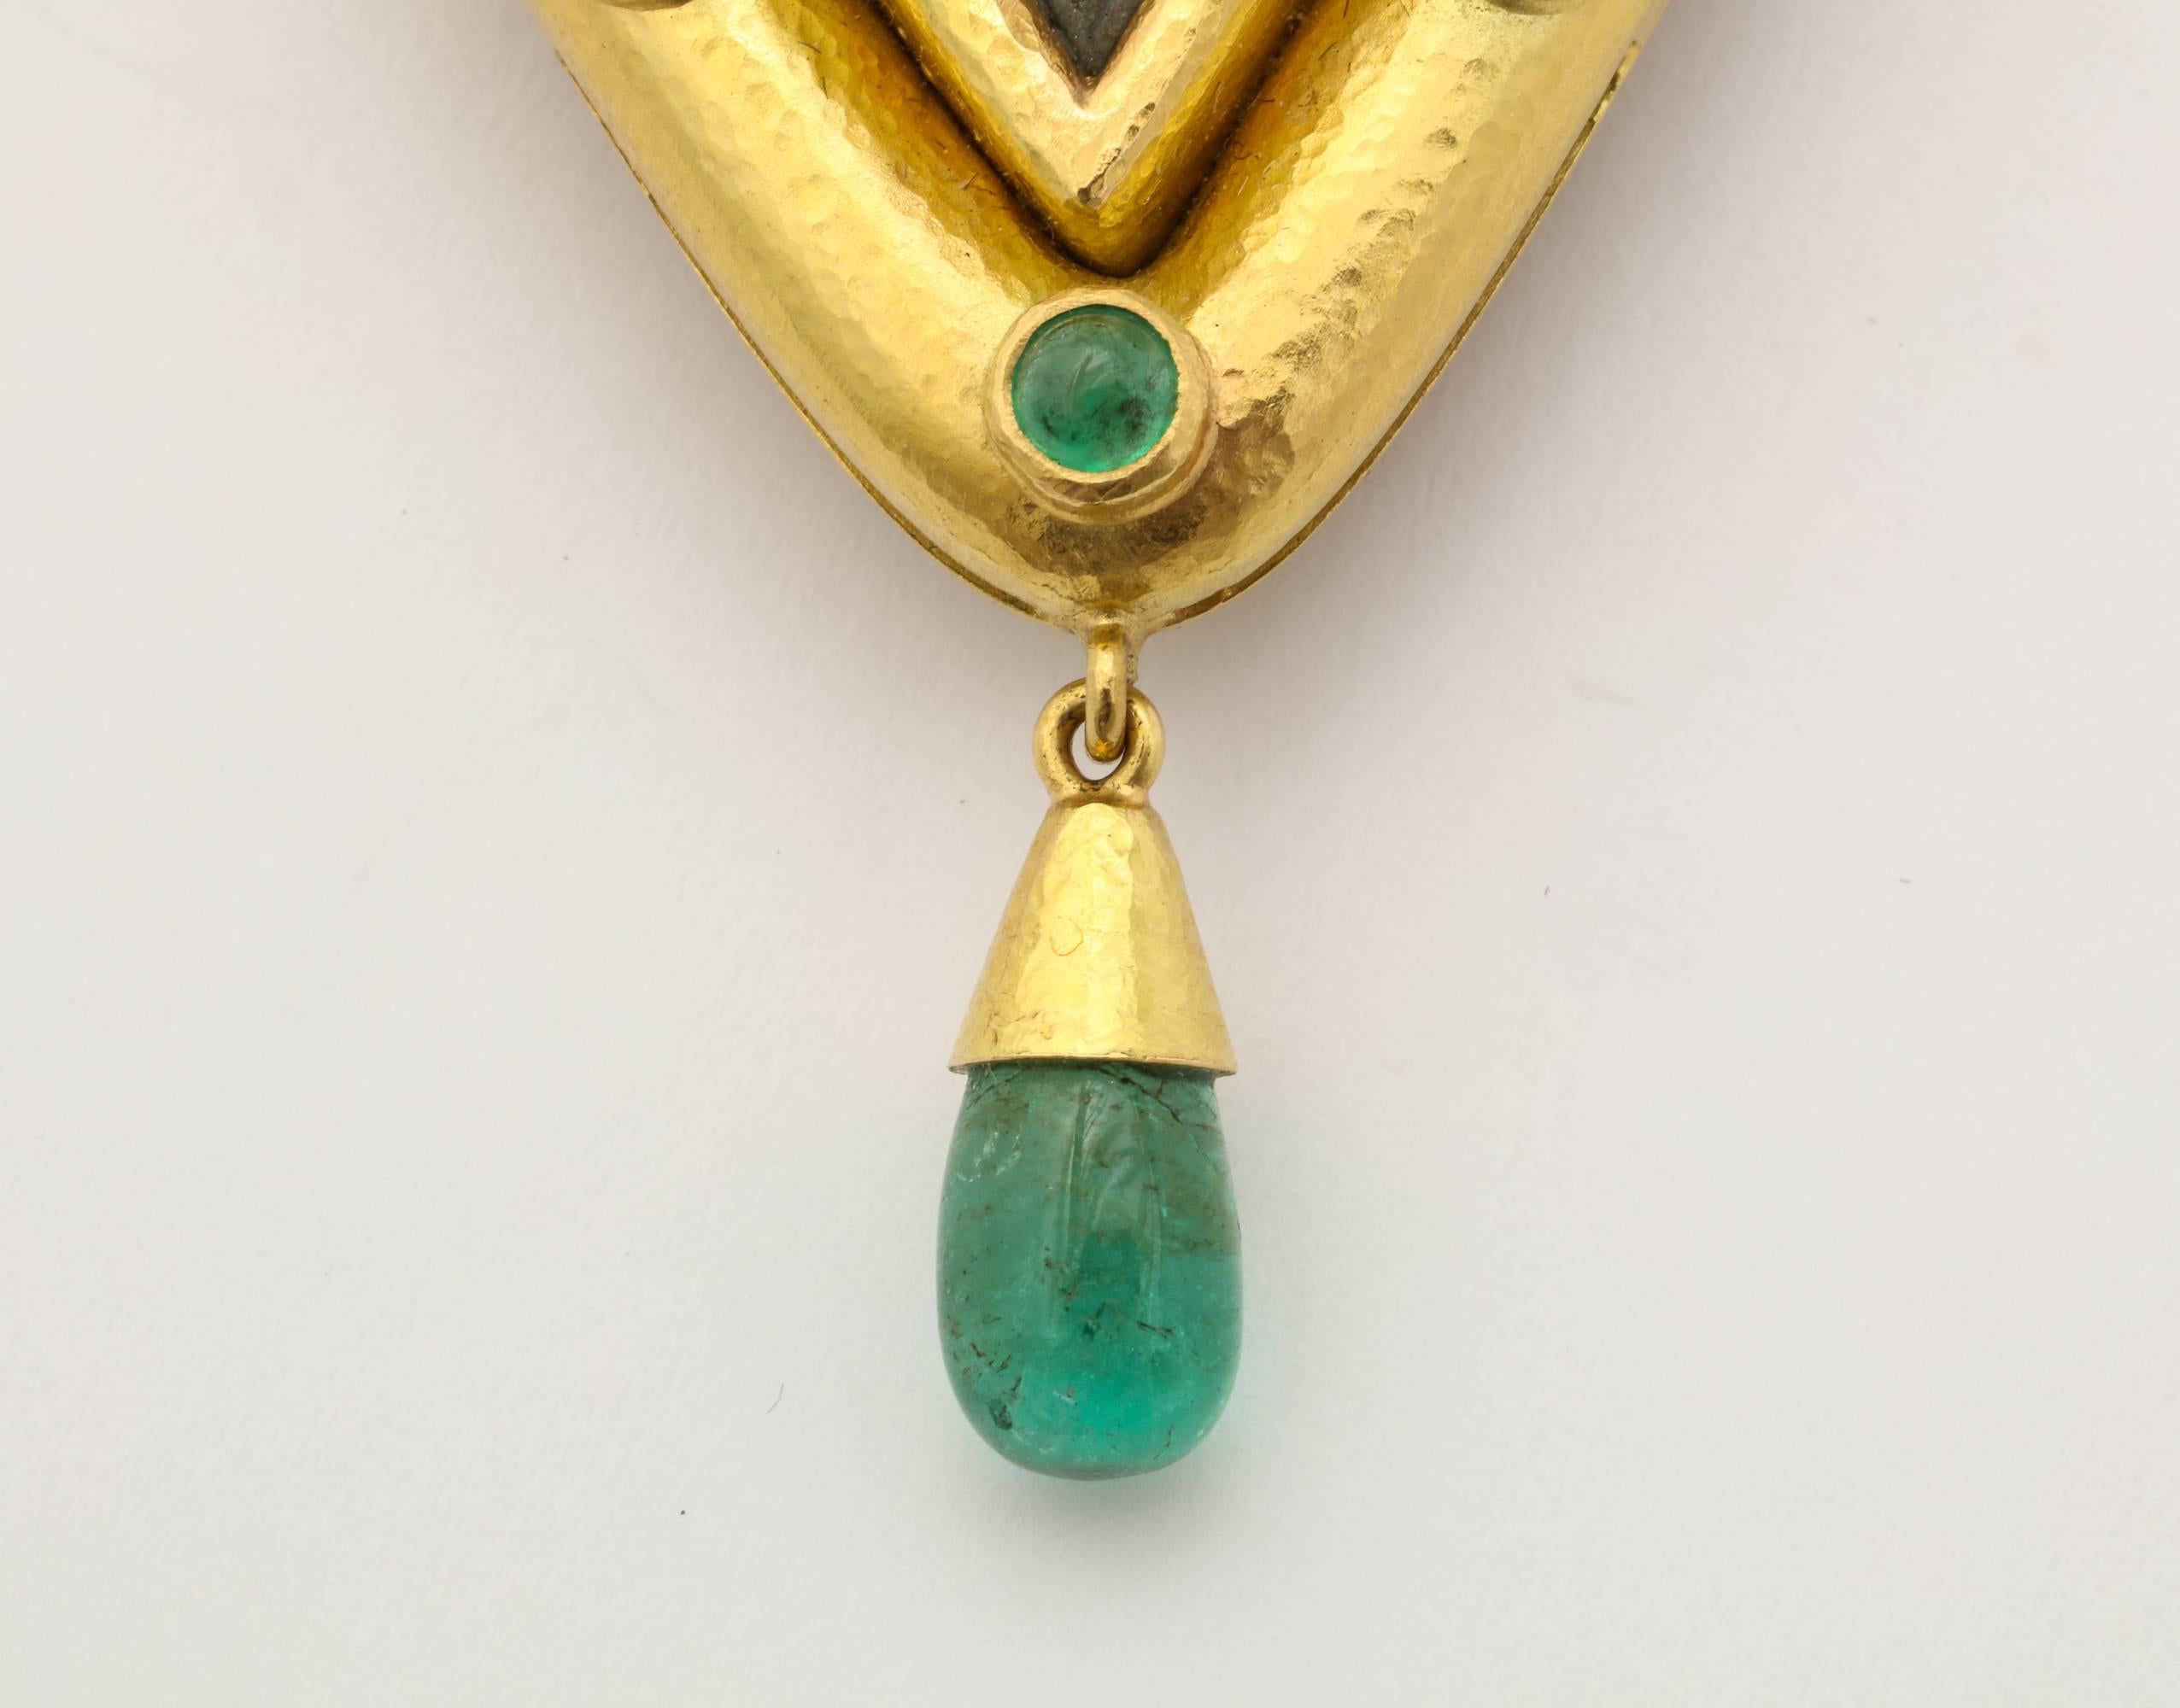 A beautifully crafted combination pendant/brooch by Elizabeth Locke of textured 18K gold, framing an antique lava carving, and set with cabochon emeralds and hung with an emerald drop. The bale is removable and the ring folds away for a clean edged